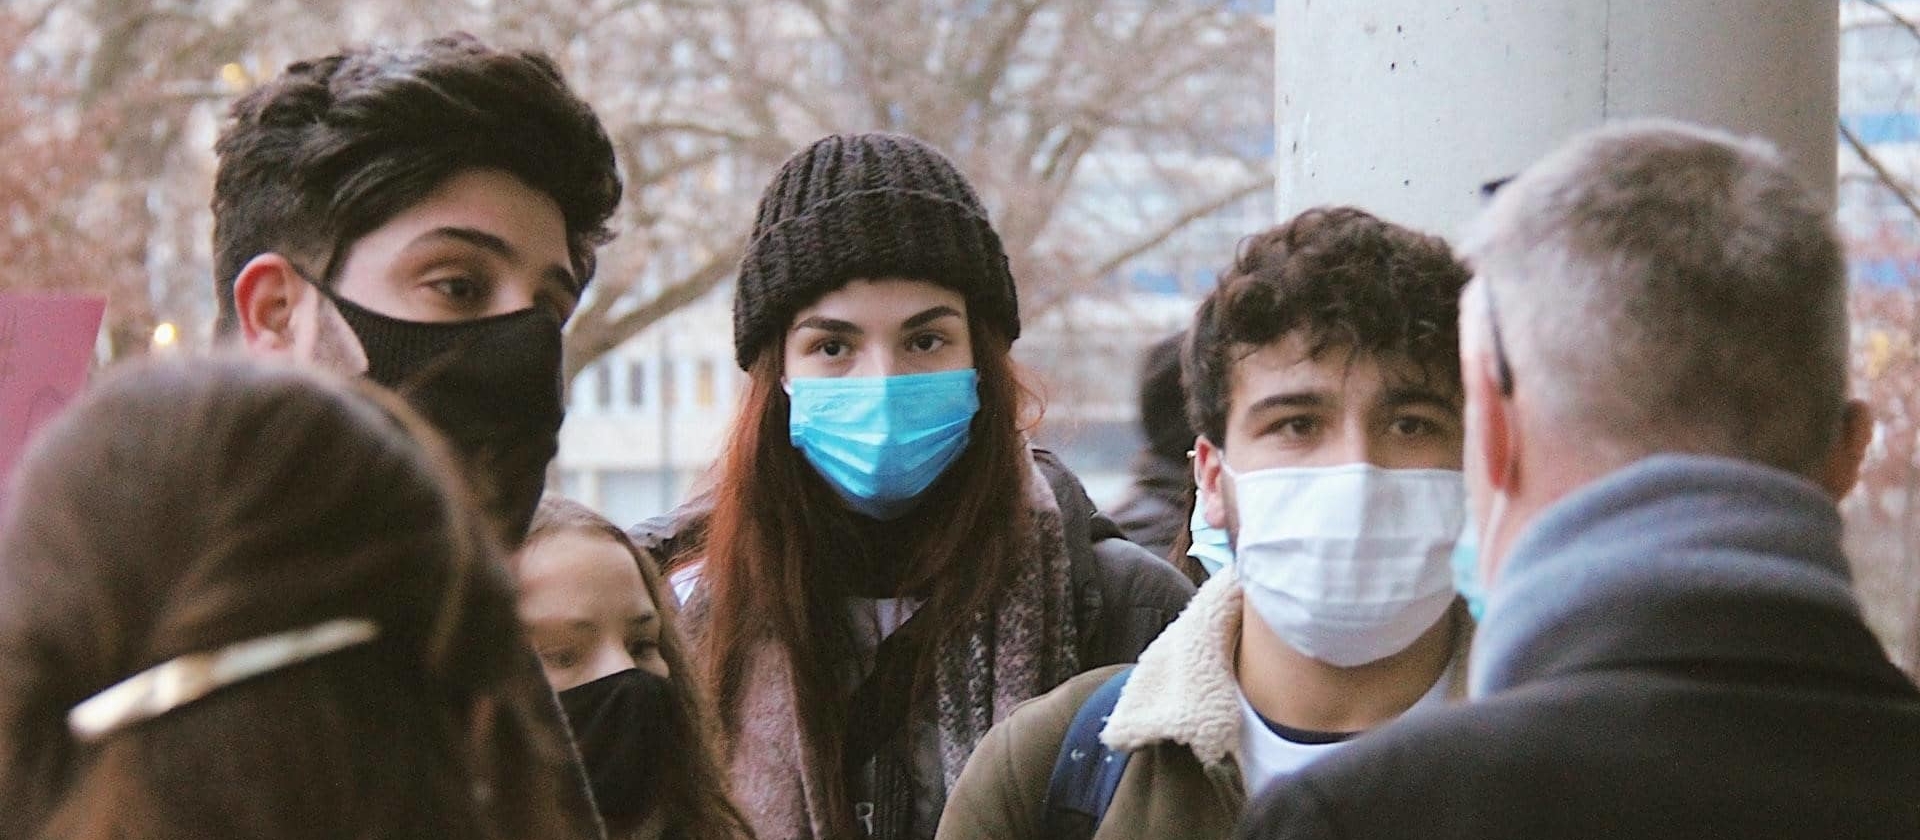 A group of people wearing Face Masks